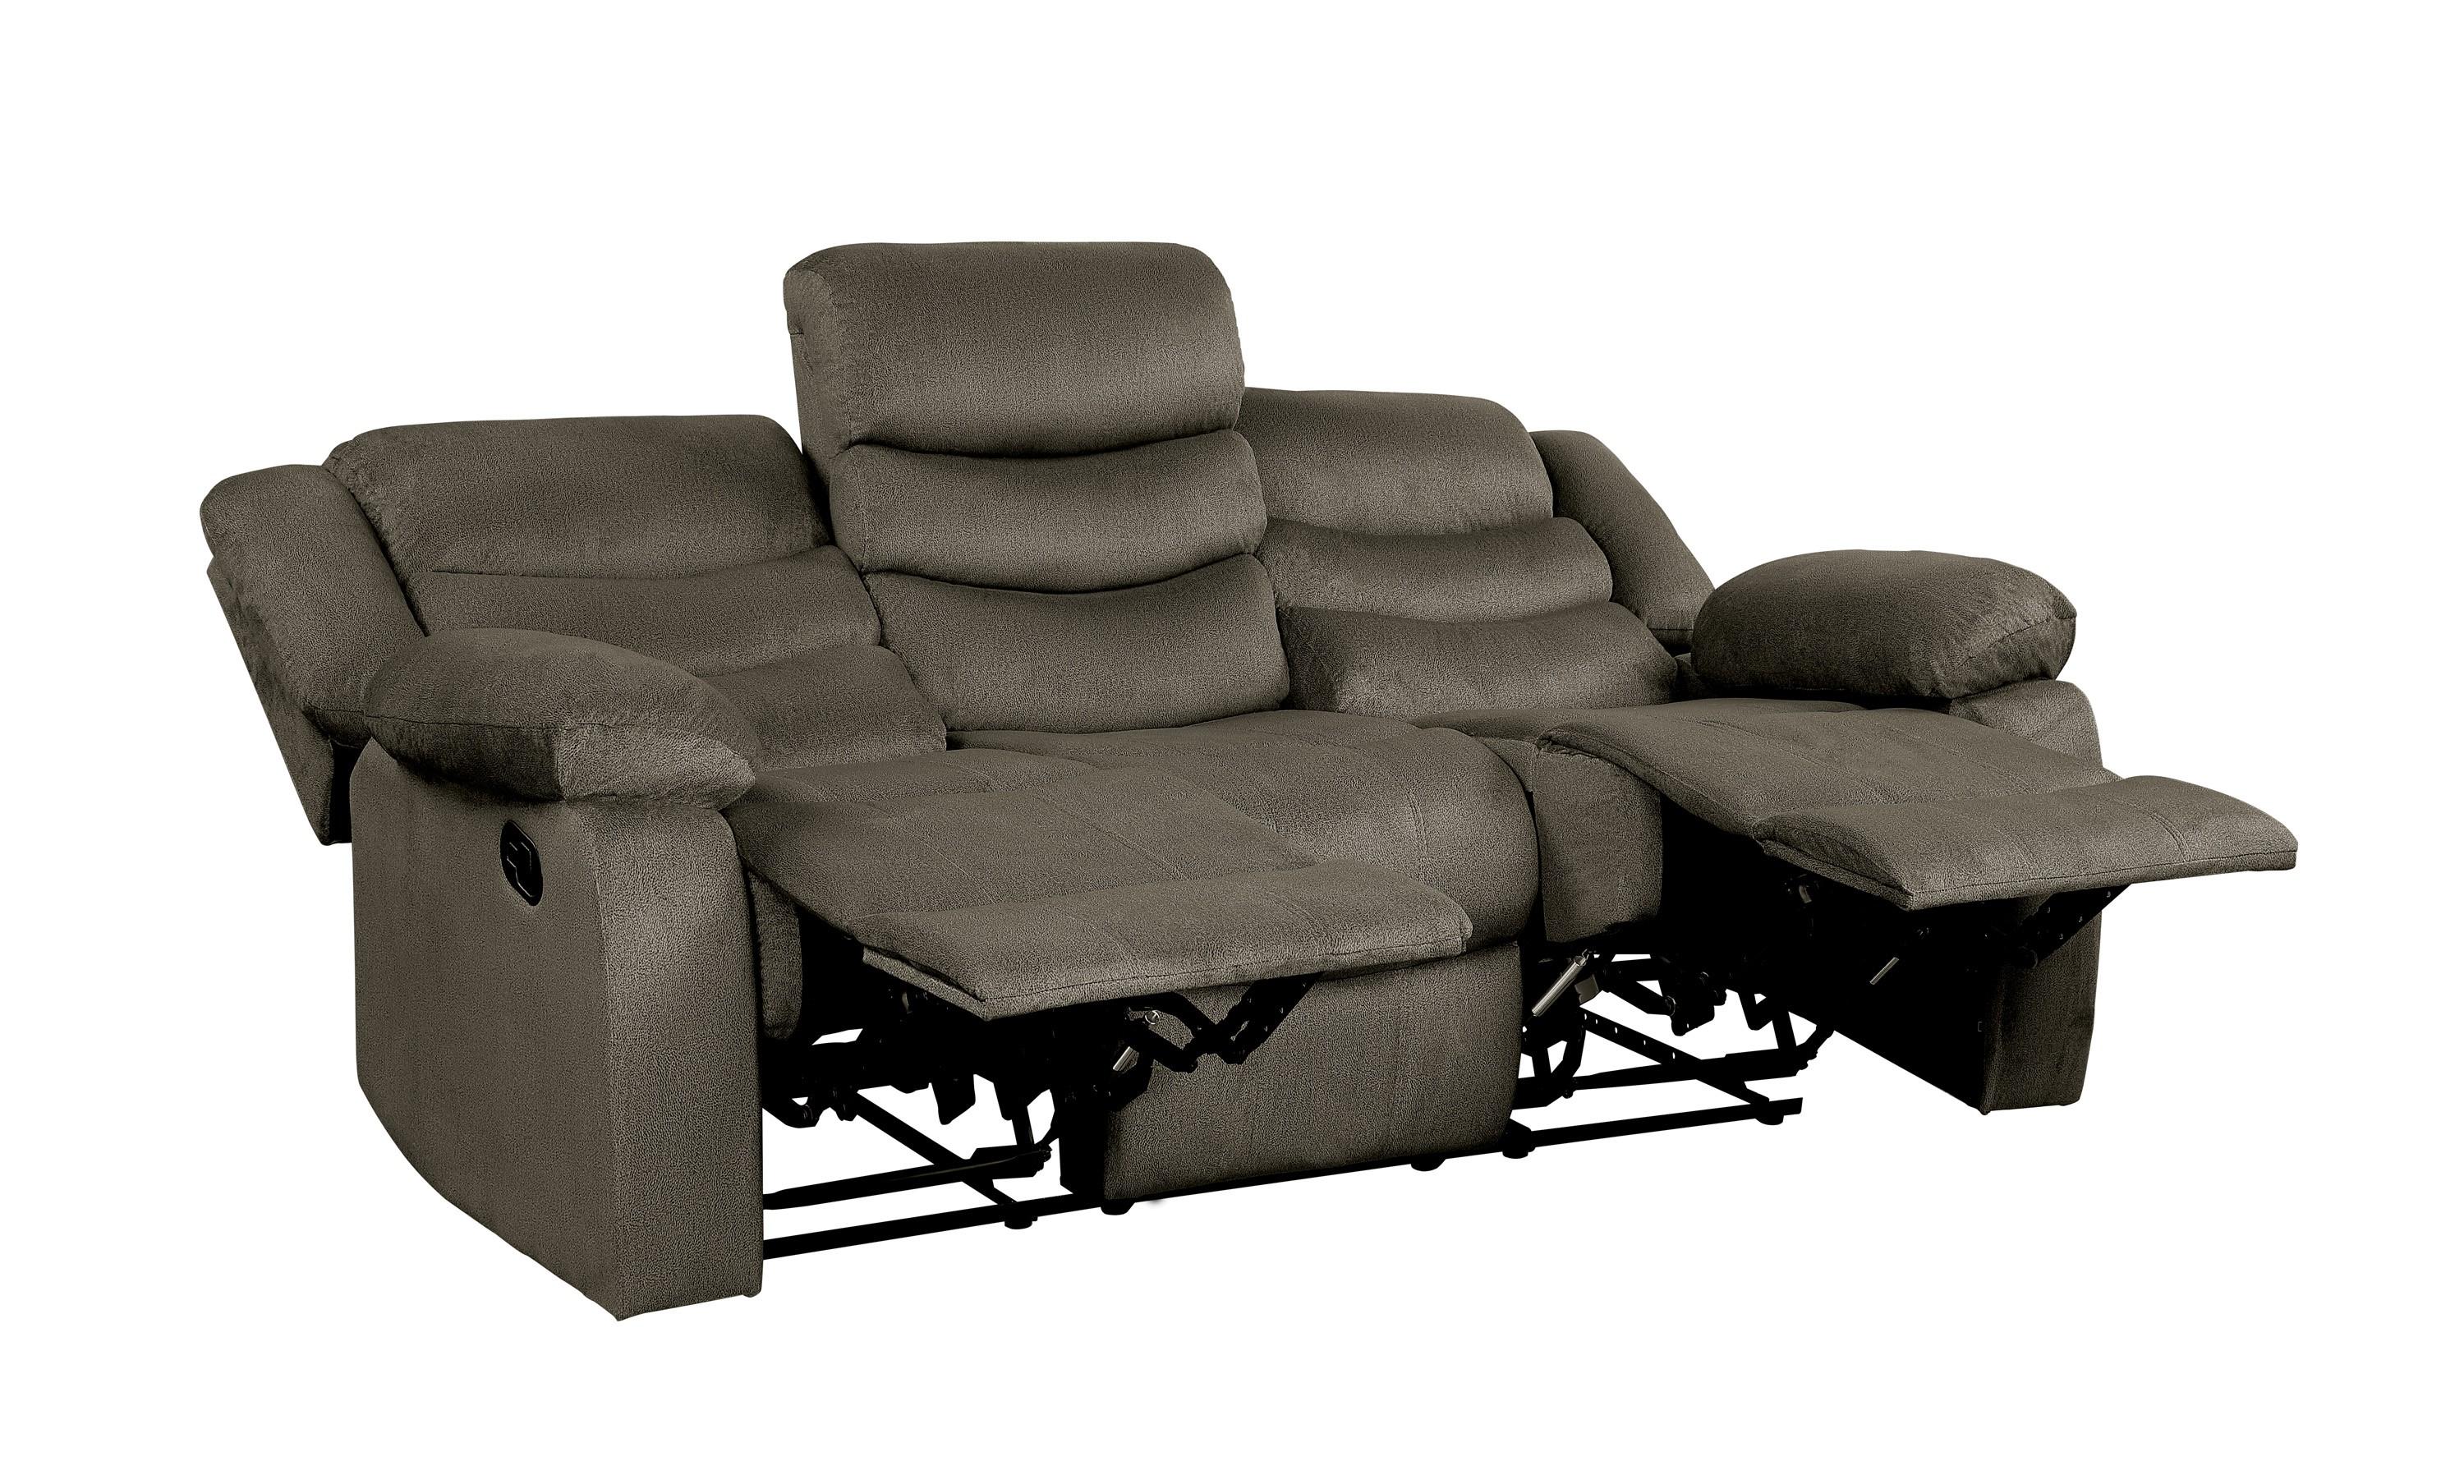 

                    
Homelegance 9526BR-2PC Discus Reclining Sofa Set Brown Microfiber Purchase 
